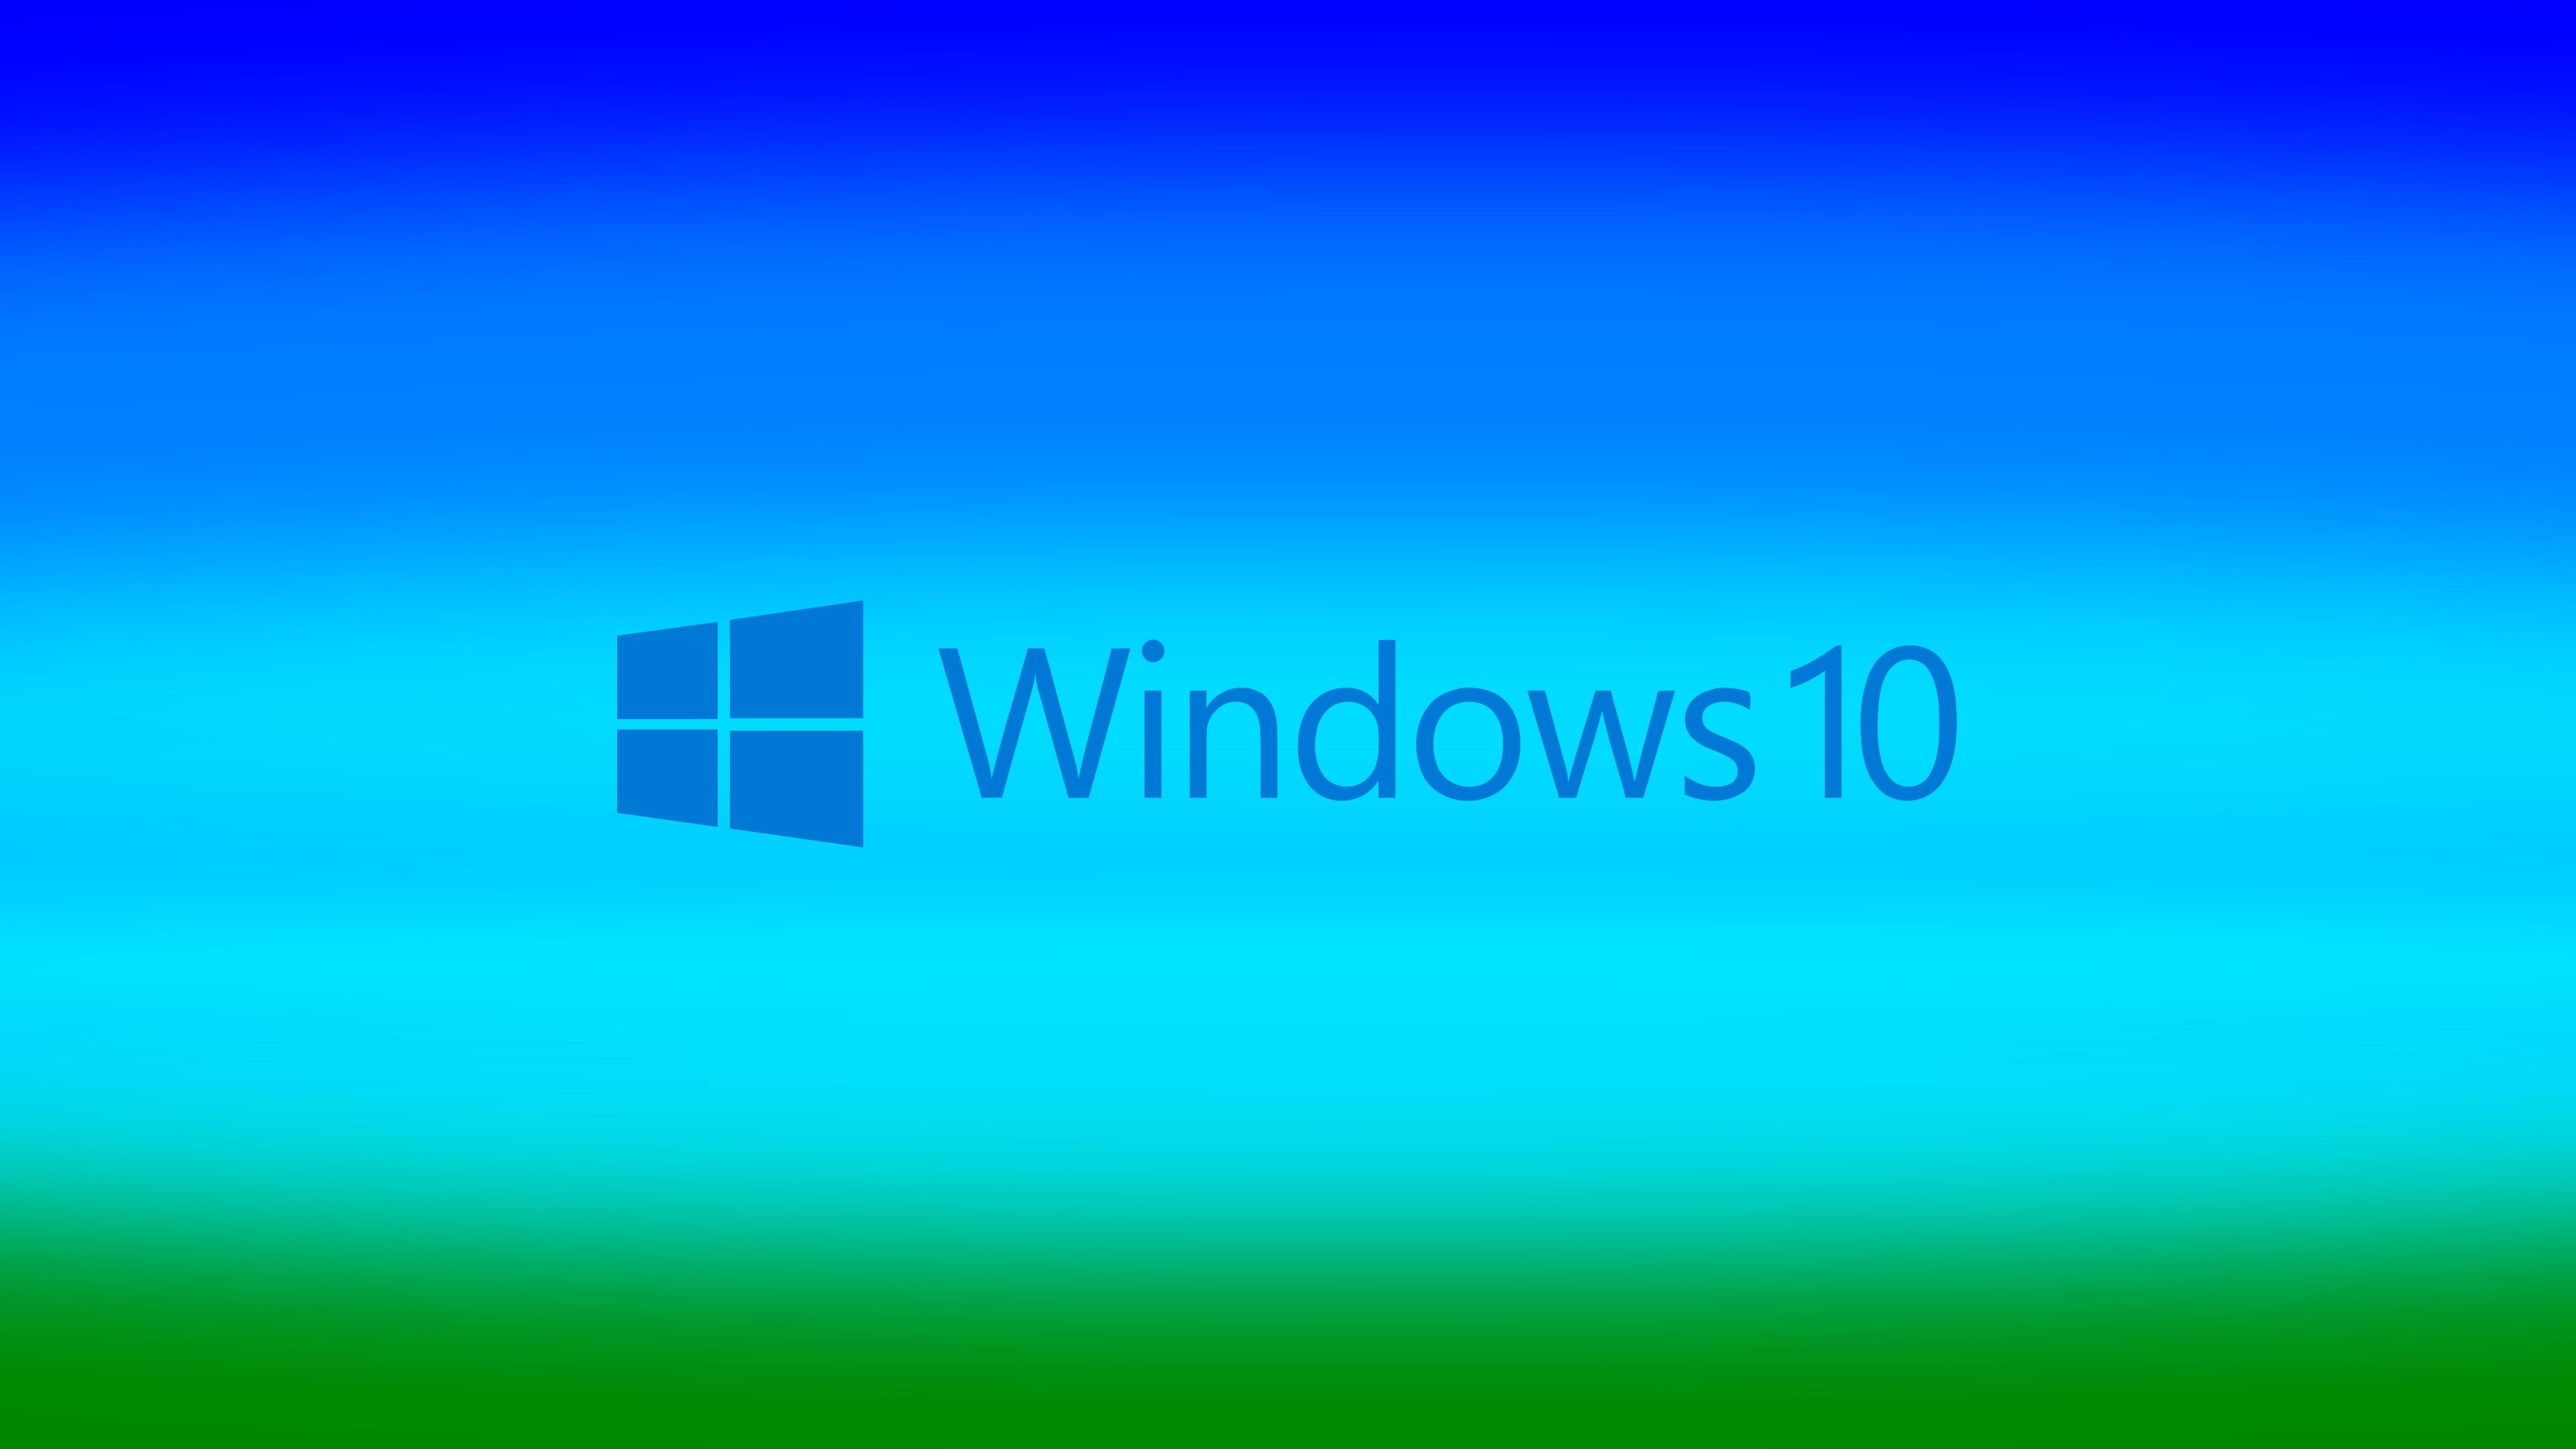 General 3840x2160 Windows 10 computer blue green operating system